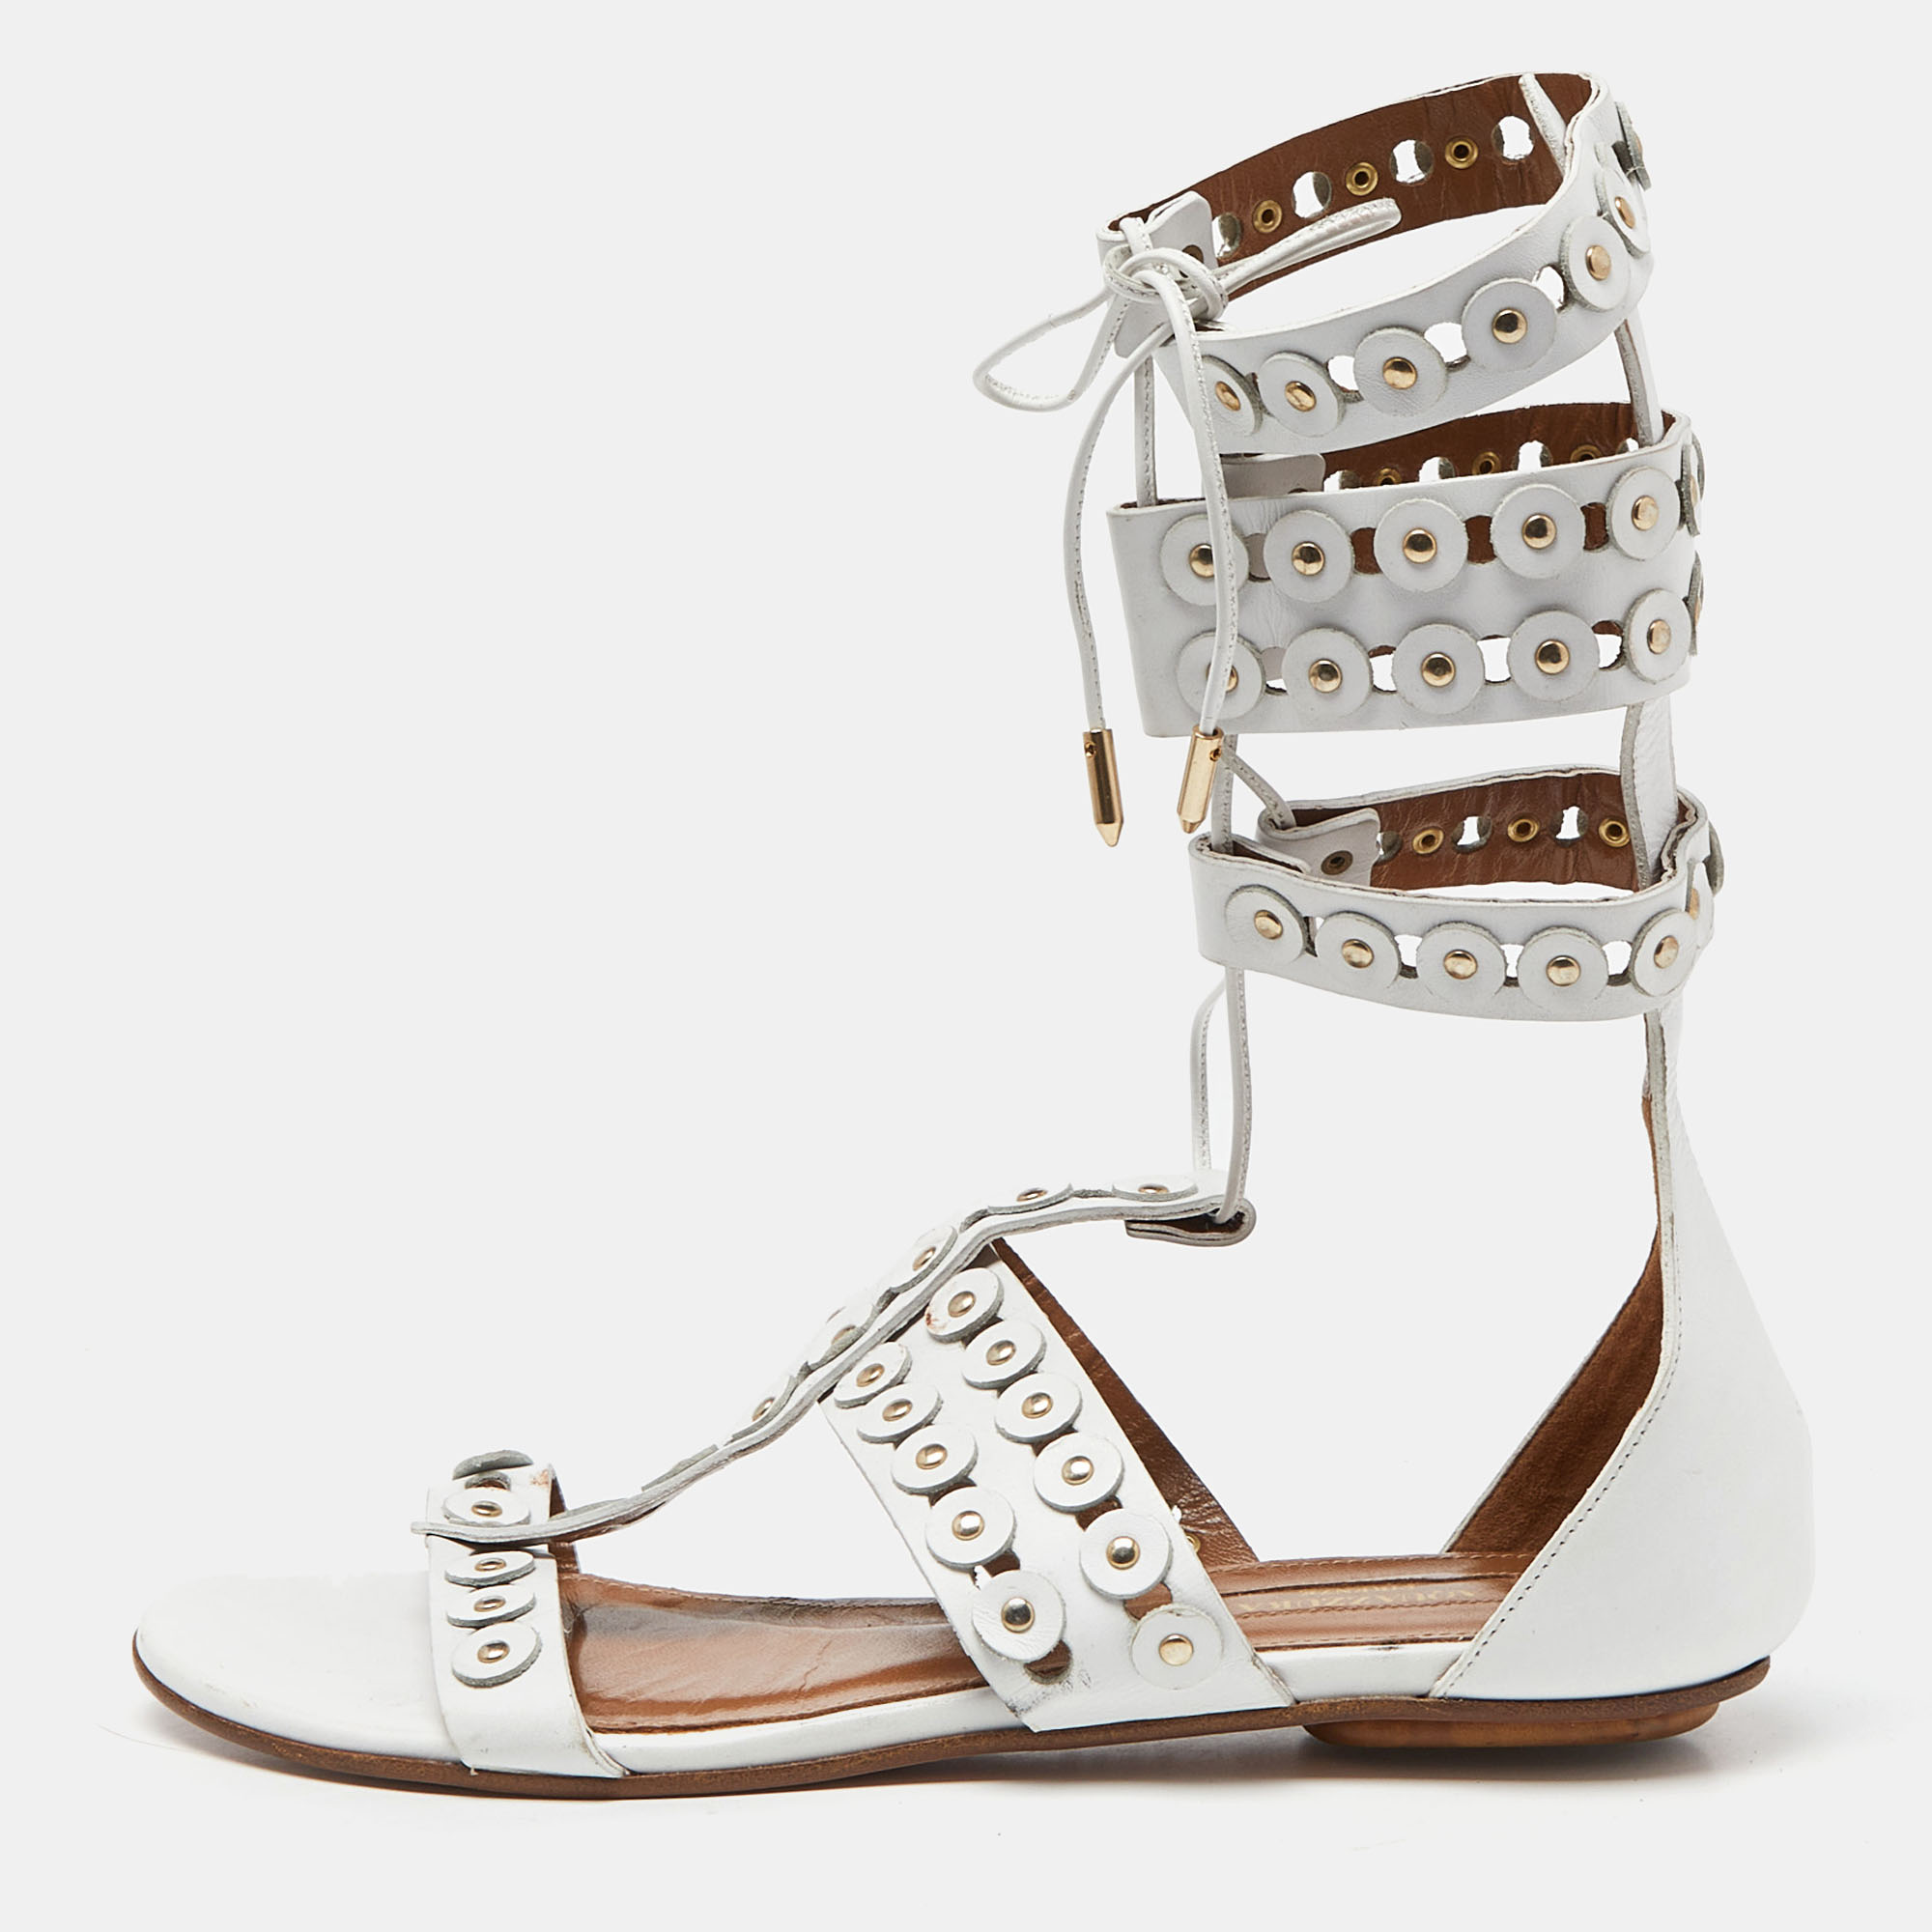 Aquazzura presents to you these white sandals that will frame your feet beautifully. They are crafted from leather in a gladiator design and complemented with tie up fastenings zippers on the counters and durable soles.